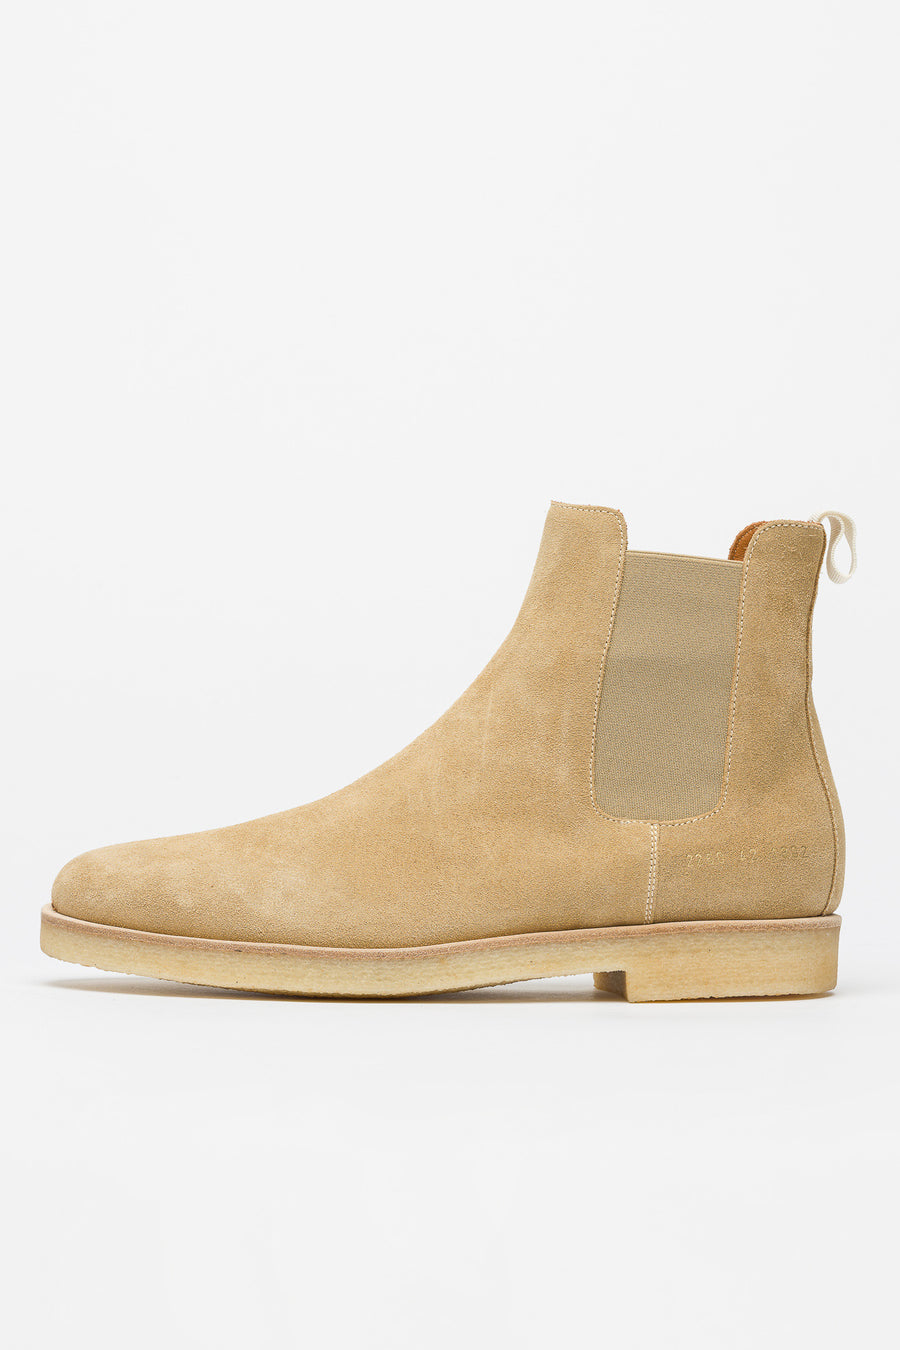 Chelsea Boots in Tan Suede